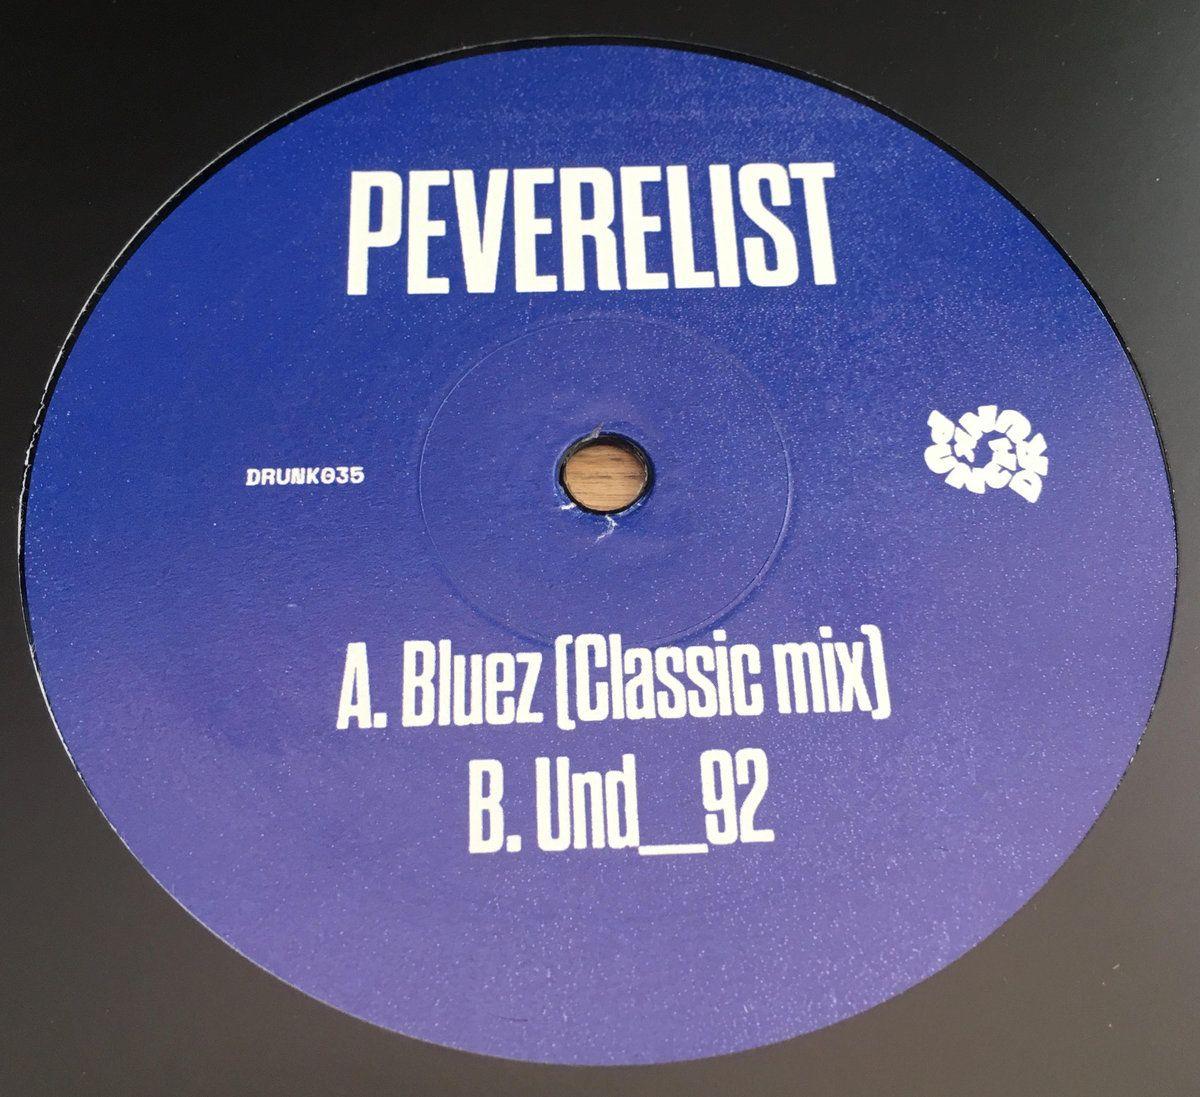 In a Circle with a Blue Z Logo - Bluez (Classic mix) / Und_92 | Peverelist